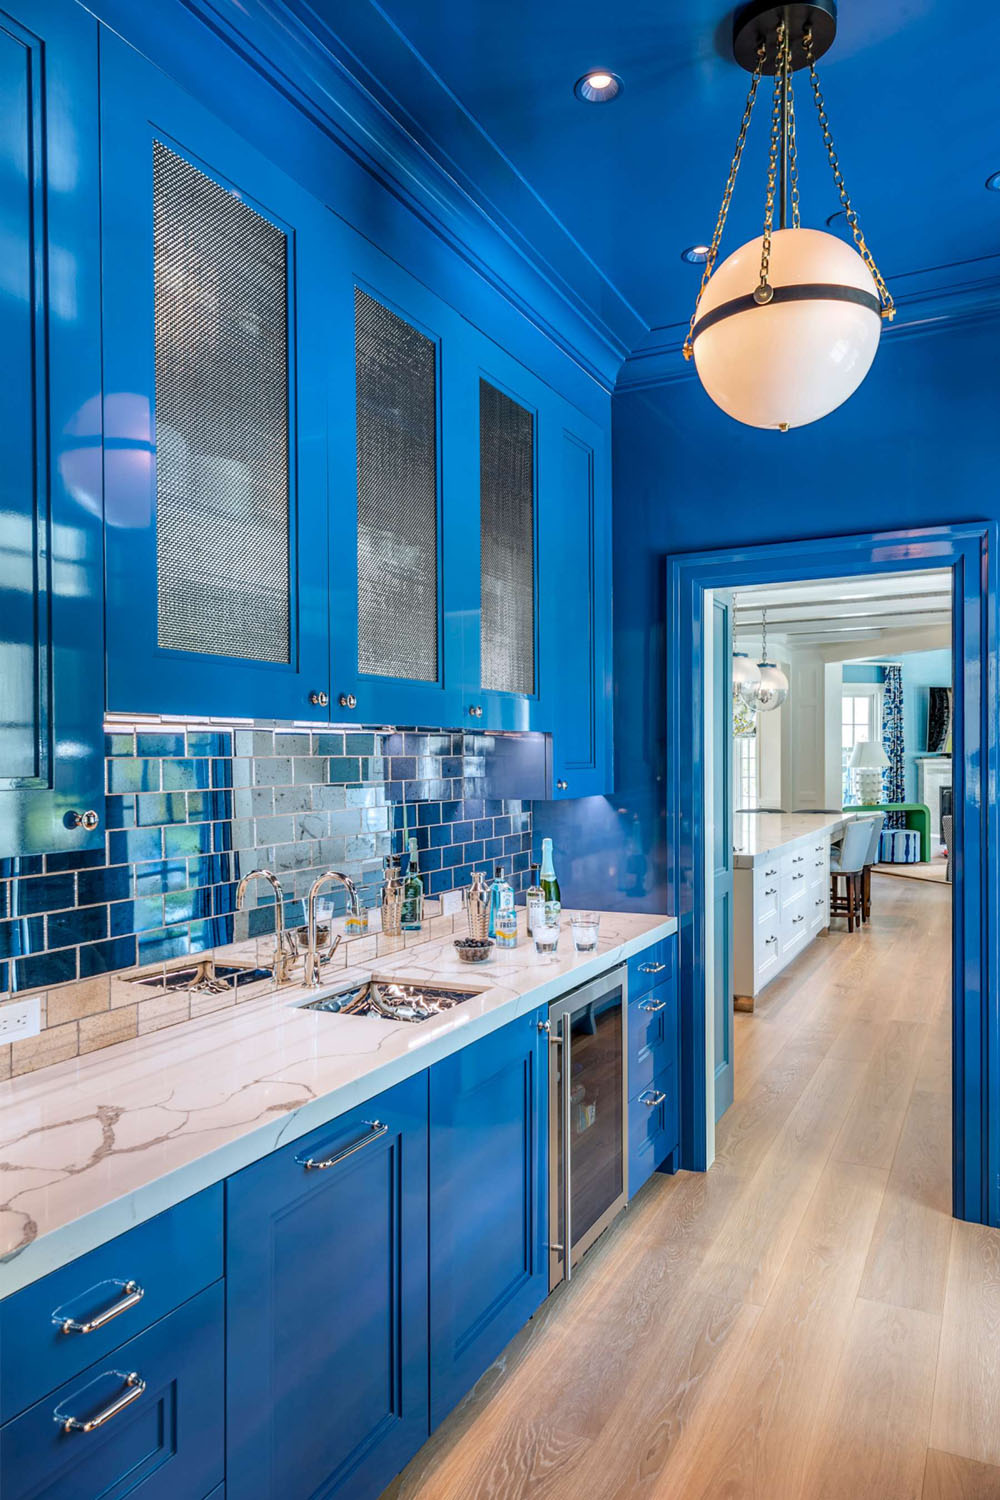 Royal Blue Butler’s Pantry in a High-Gloss Lacquer Finish